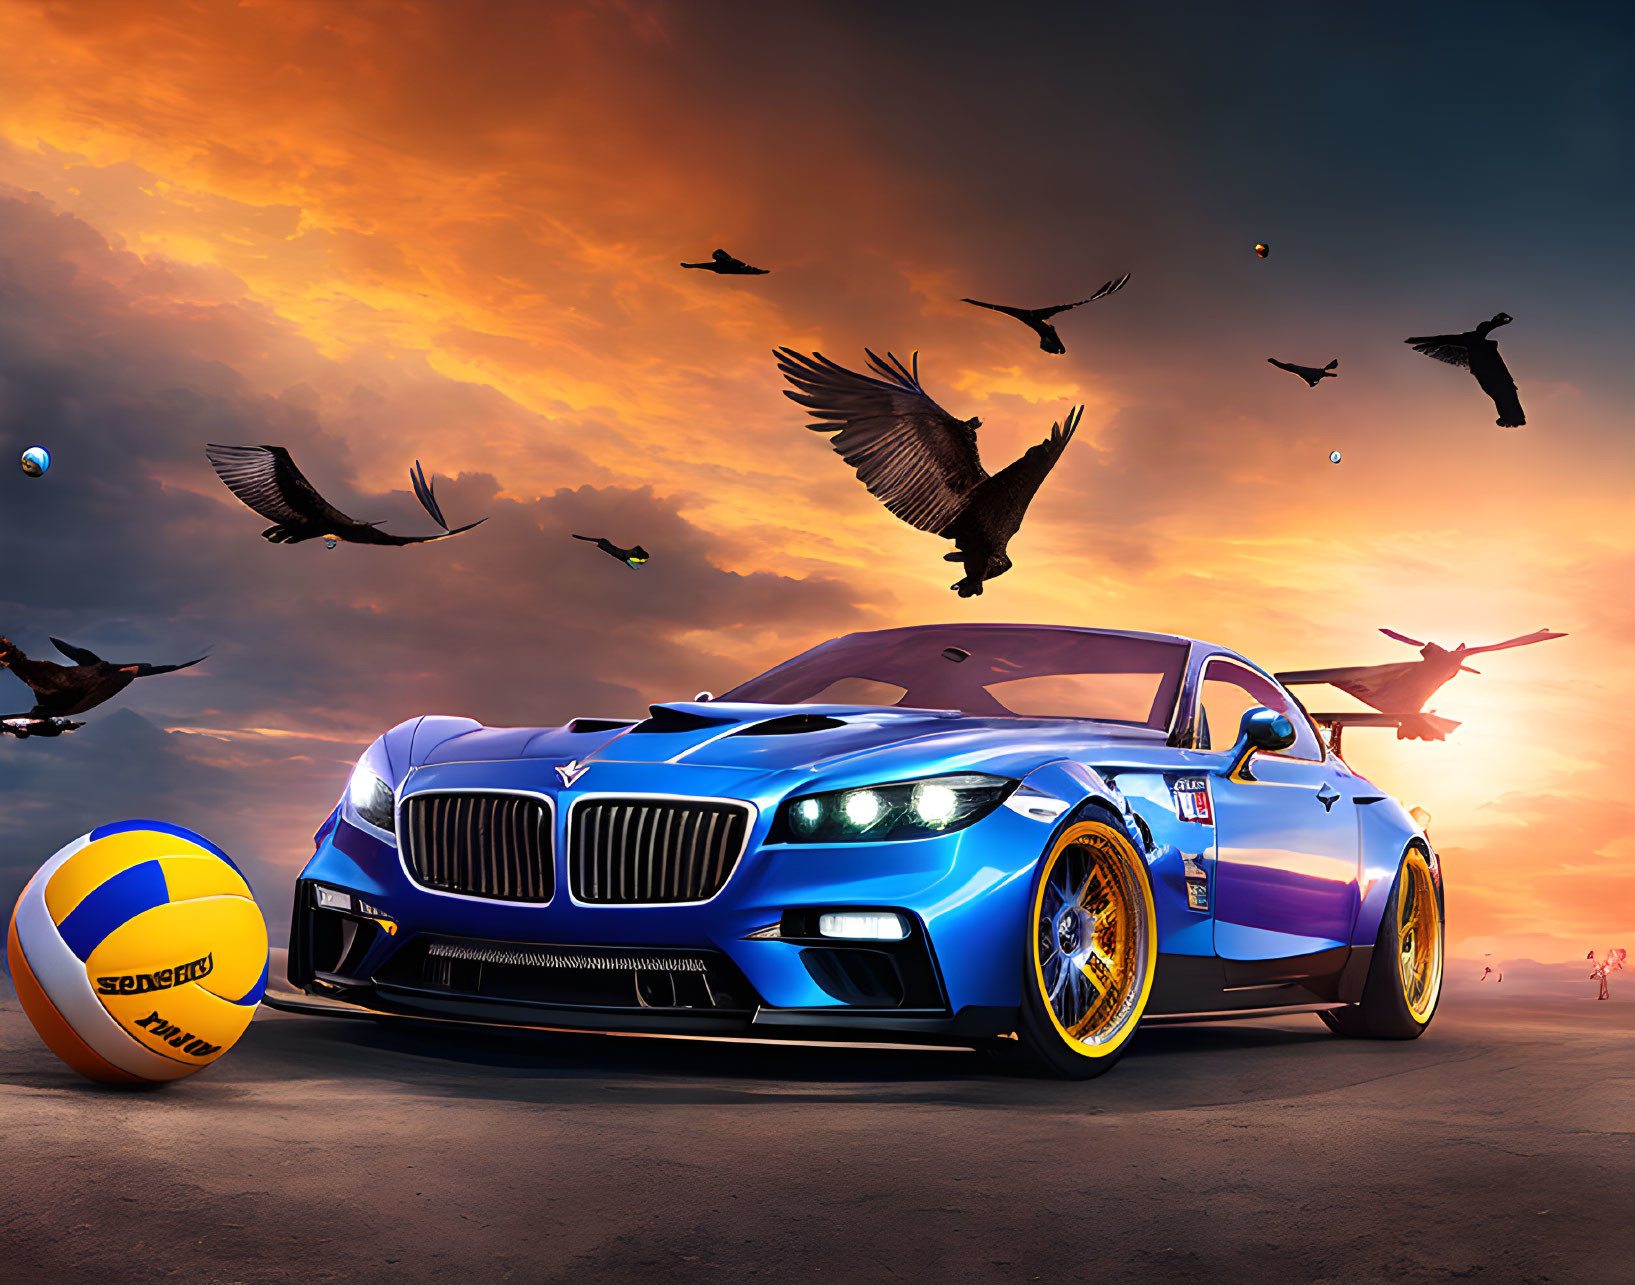 Customized Blue BMW Car in Fiery Sunset Scene with Beach Volleyball